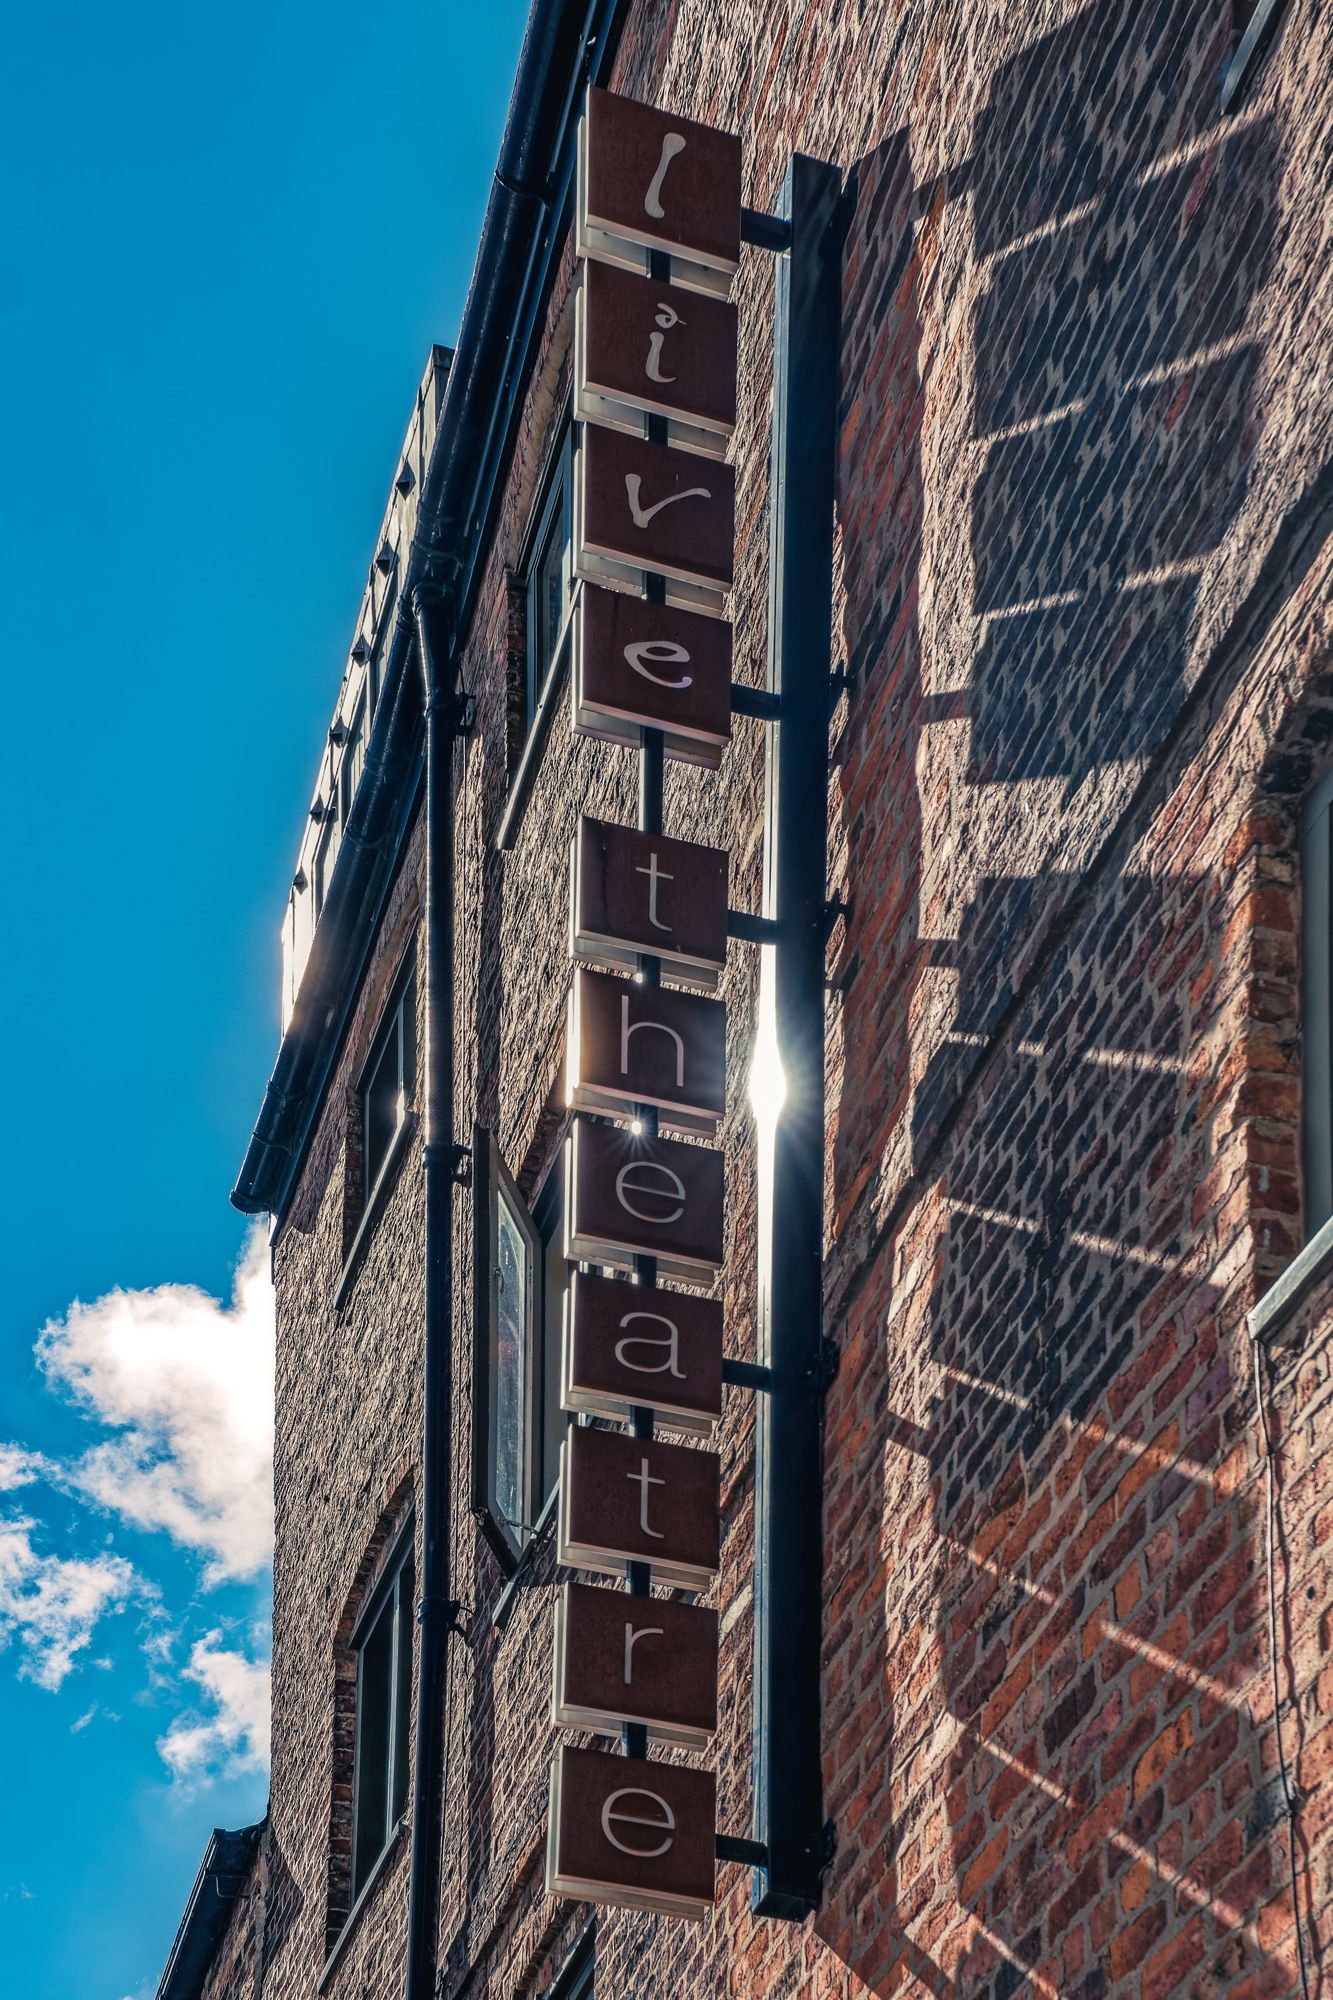 Close up detail of the sign outside of Live Theatre in Newcastle upon Tyne